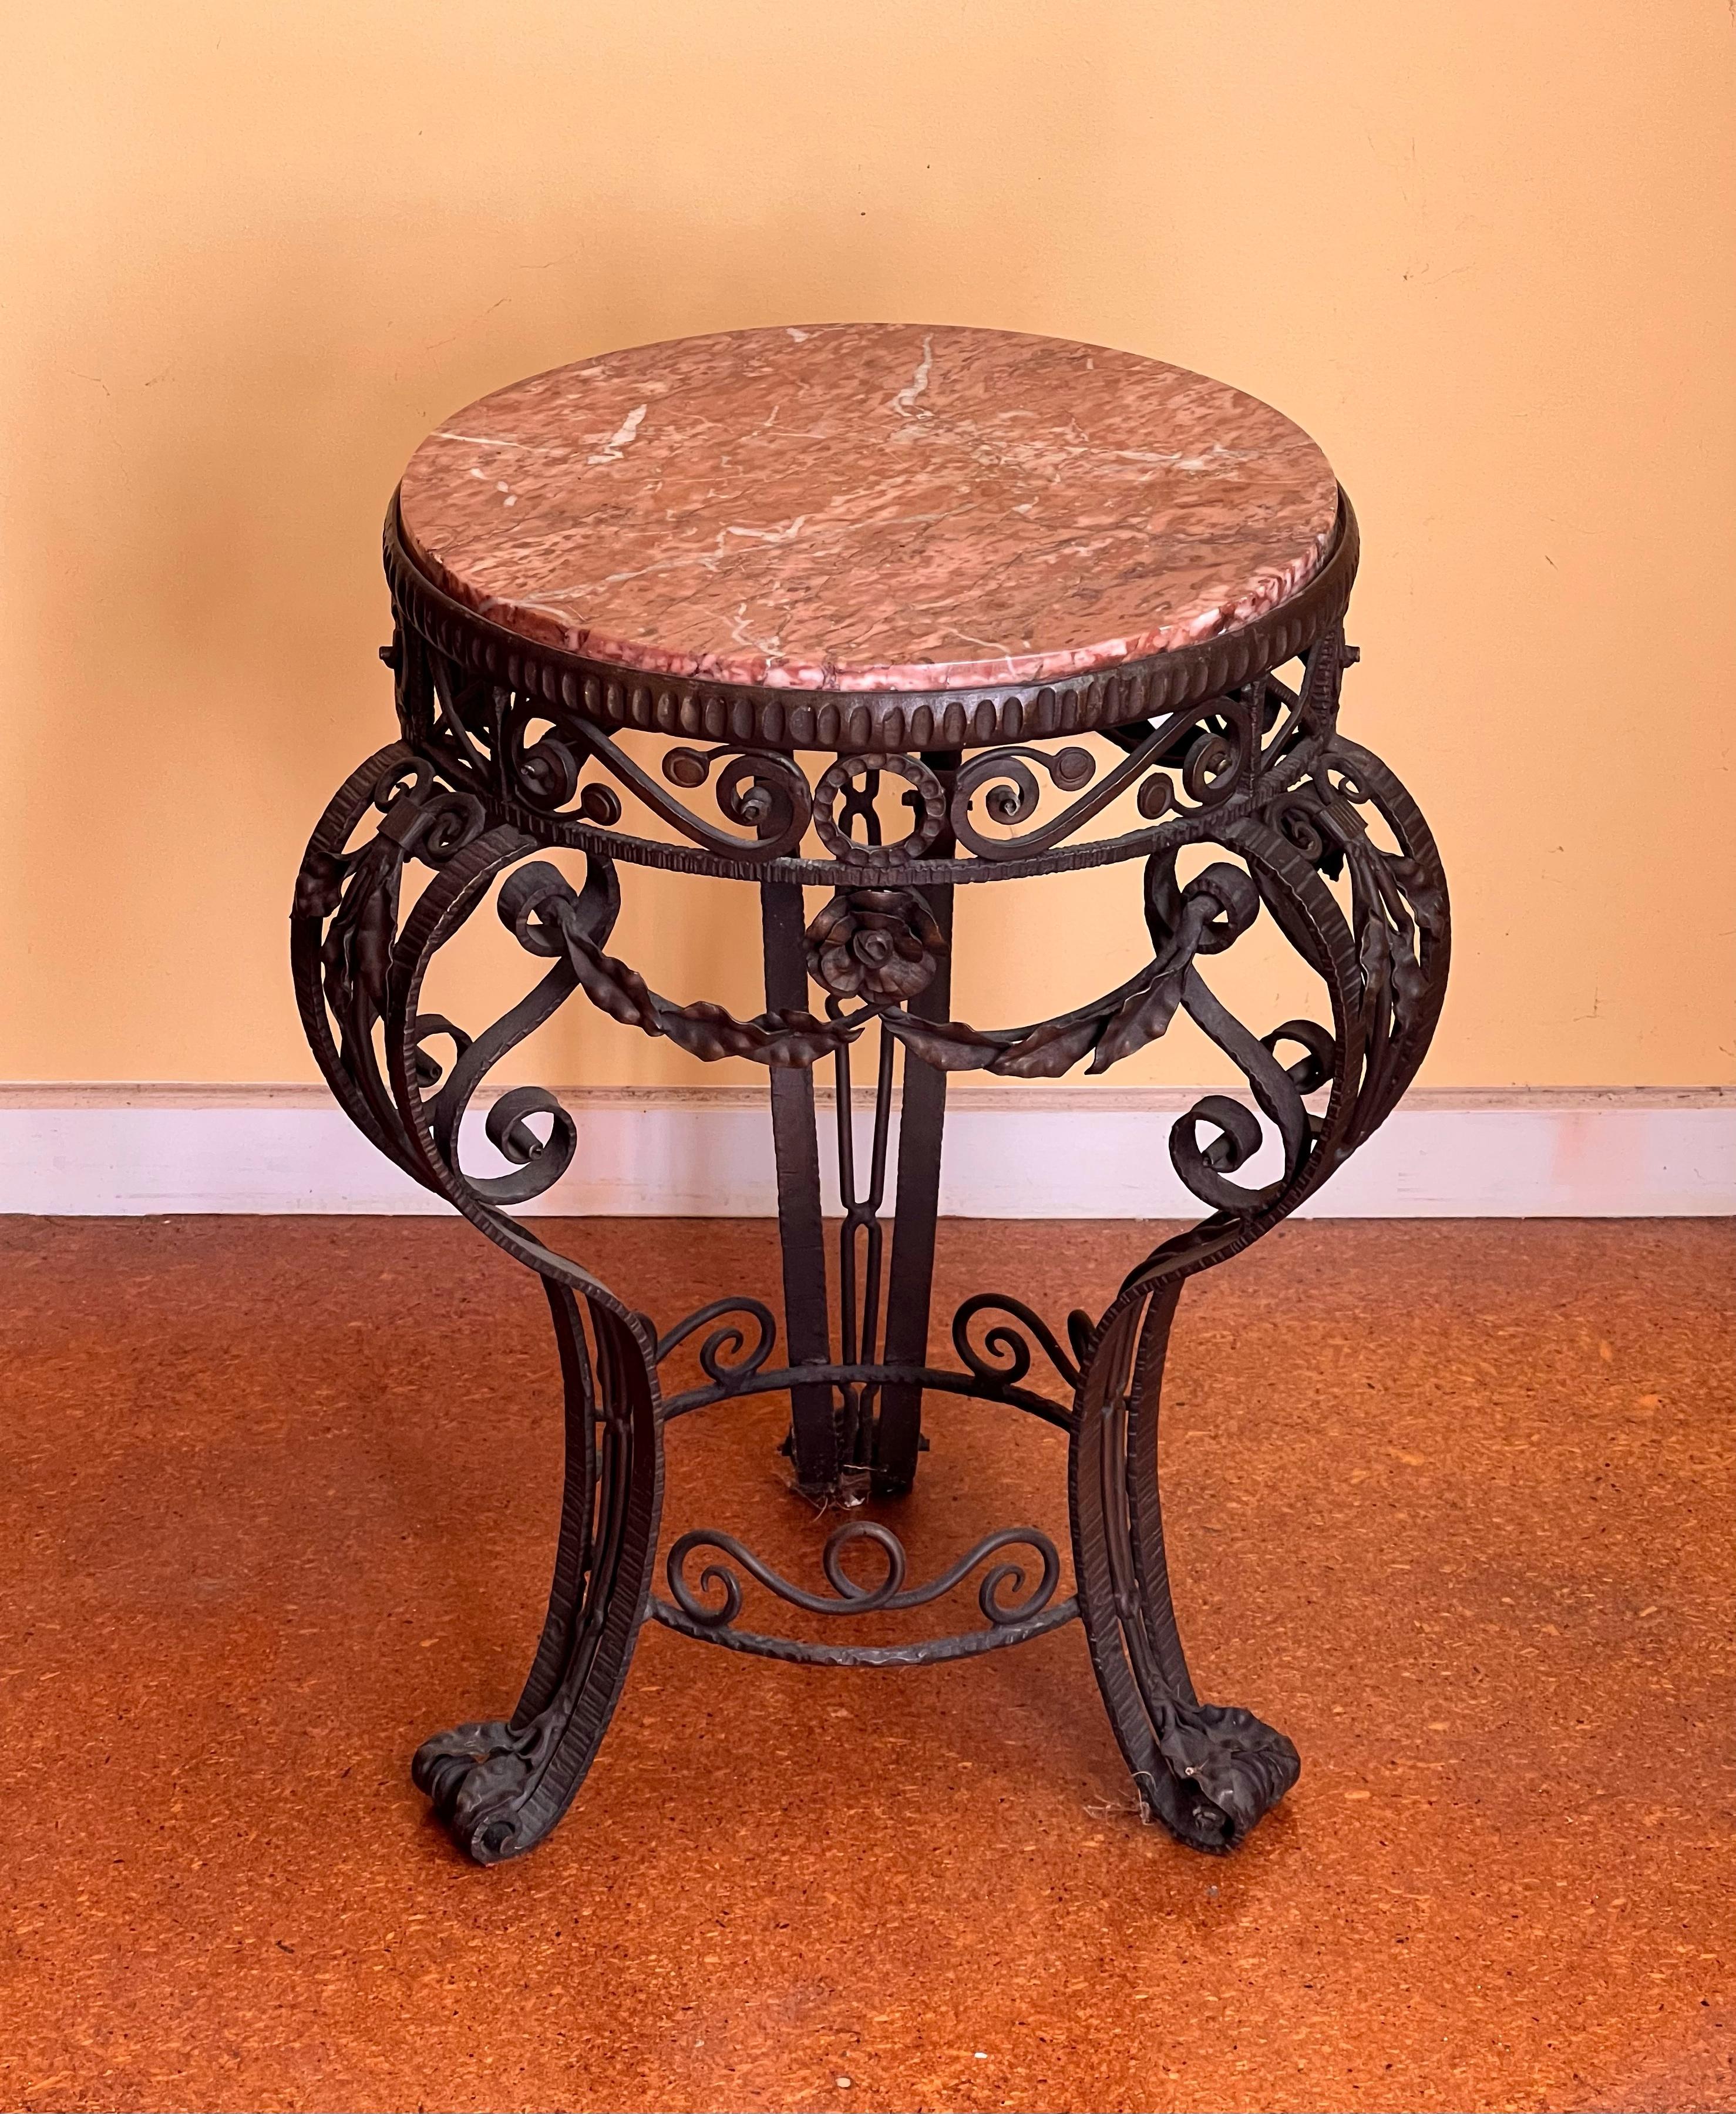 19th Century French Iron Marble Table. Circa 1890. Beautiful antique side / occasional table with detailed ironwork featuring a pink and brown-hued veined marble top.

Overall good antique condition. Light scratches to the marble top.

60cm